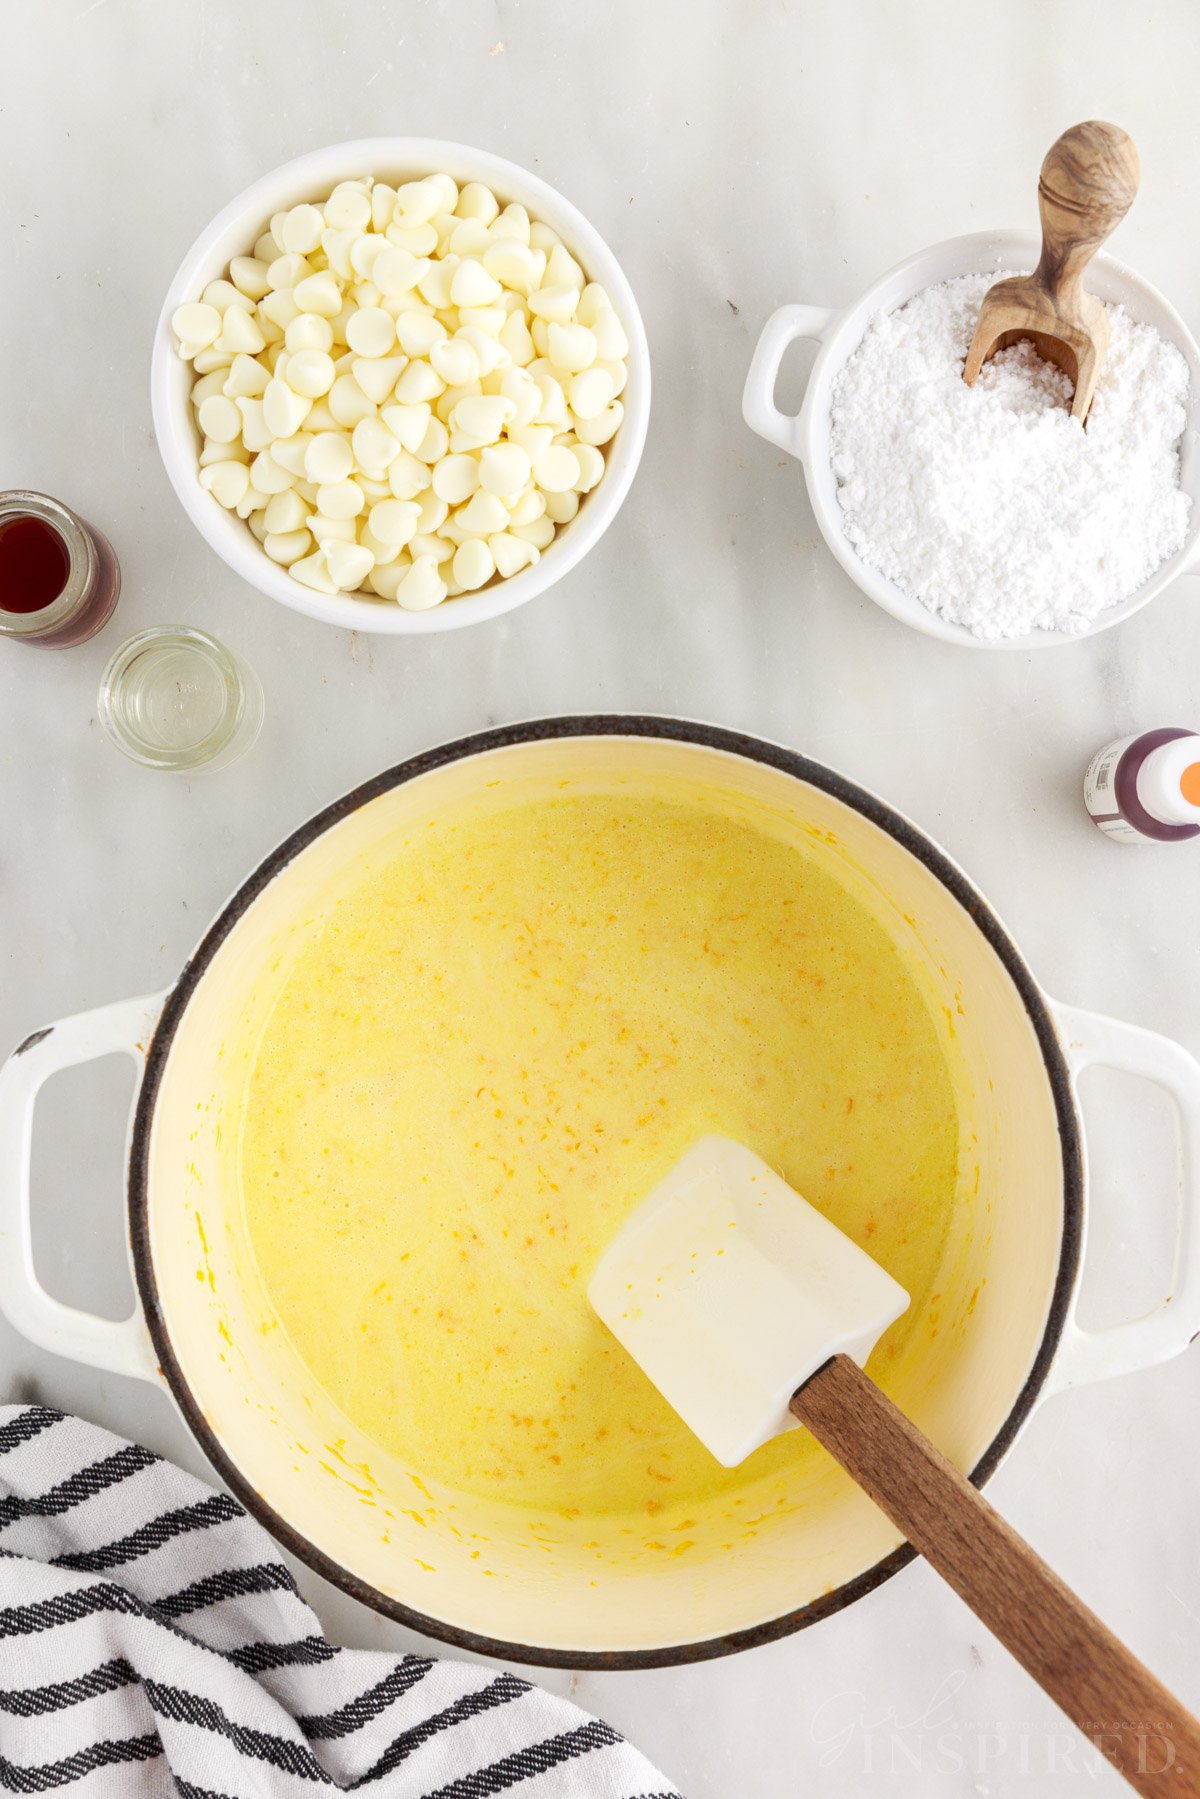 Melted butter, orange zest, and cream mixture in a saucepan with spatula.